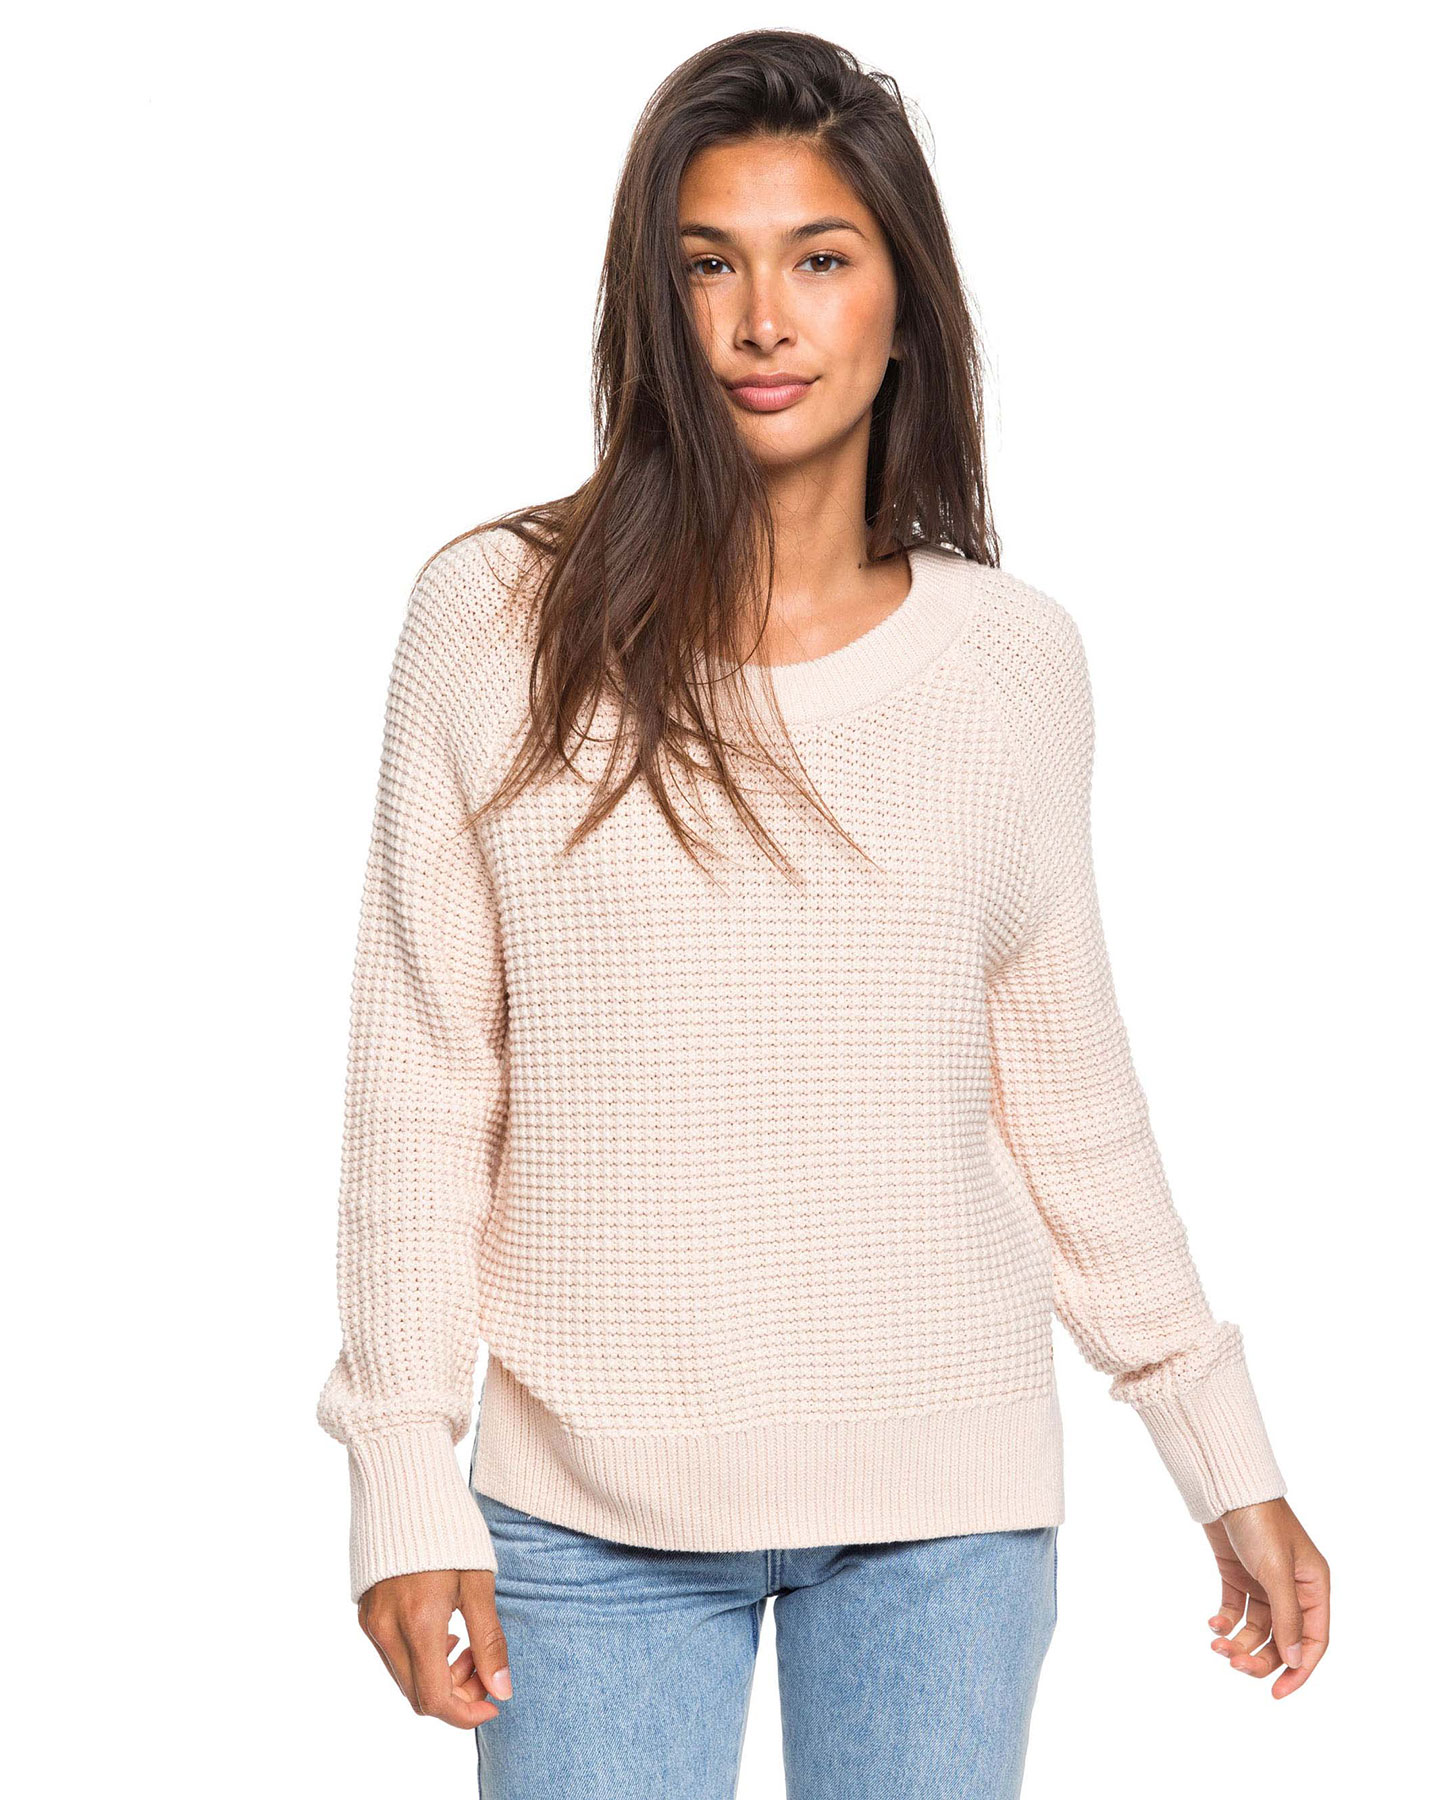 Roxy Womens All About Now Knit Jumper - Peach Blush | SurfStitch